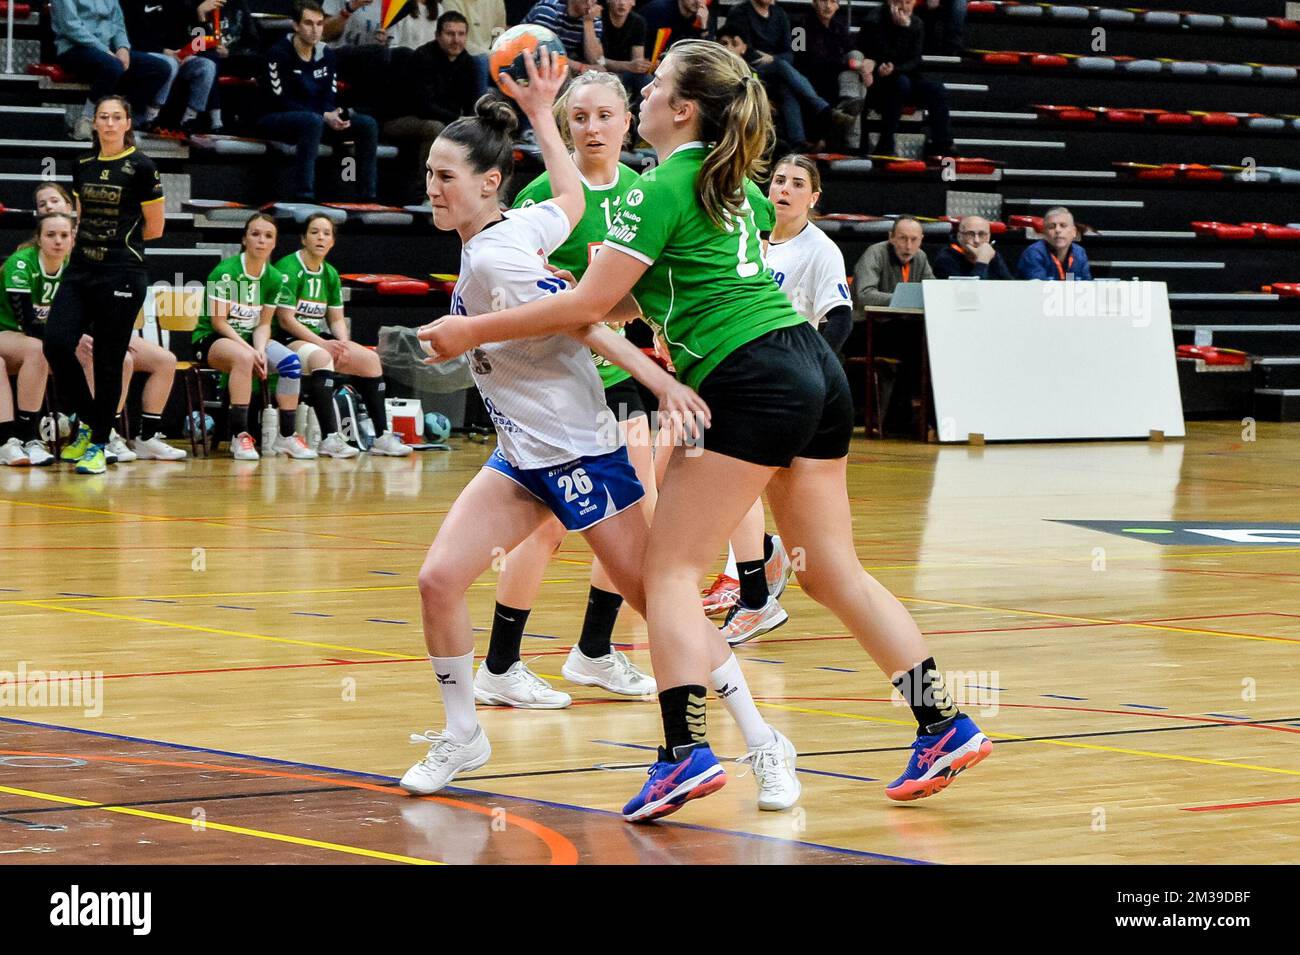 Camille Himberlin (26) of Femina Vise and Julie Coenen (27) of Initia  Hasselt pictured during a game between Initia Hasselt and Handball Femina  Vise, Saturday 09 April 2022, in Hasselt, the women's